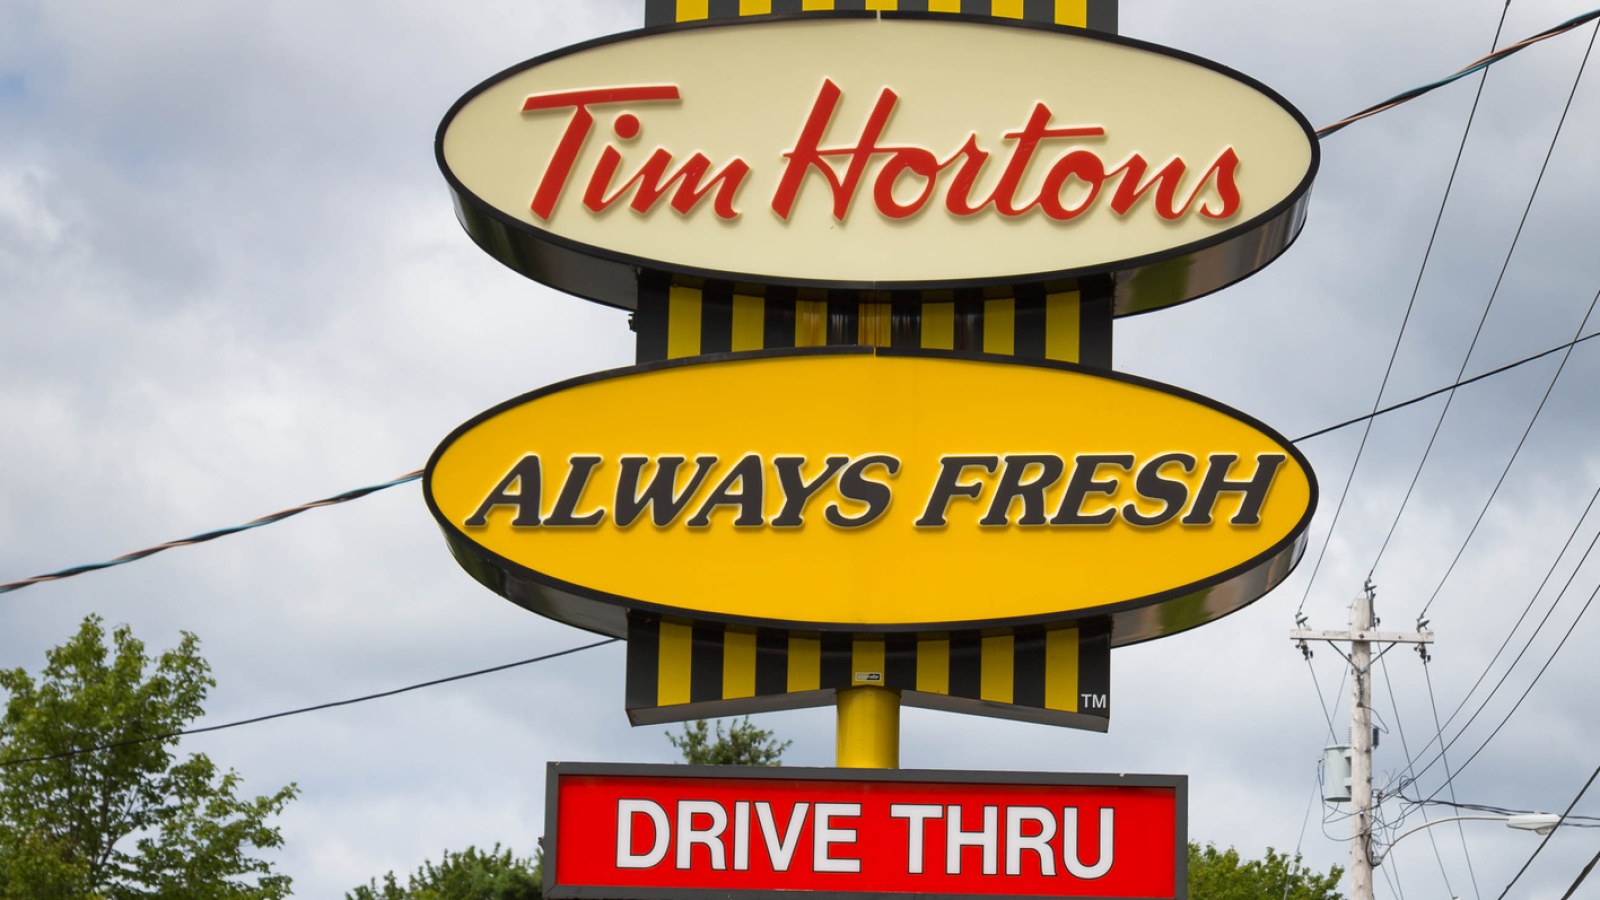 3-Year-Old Dies After Falling into Grease Trap at Tim 'Unimaginable, Unspeakable Tragedy'